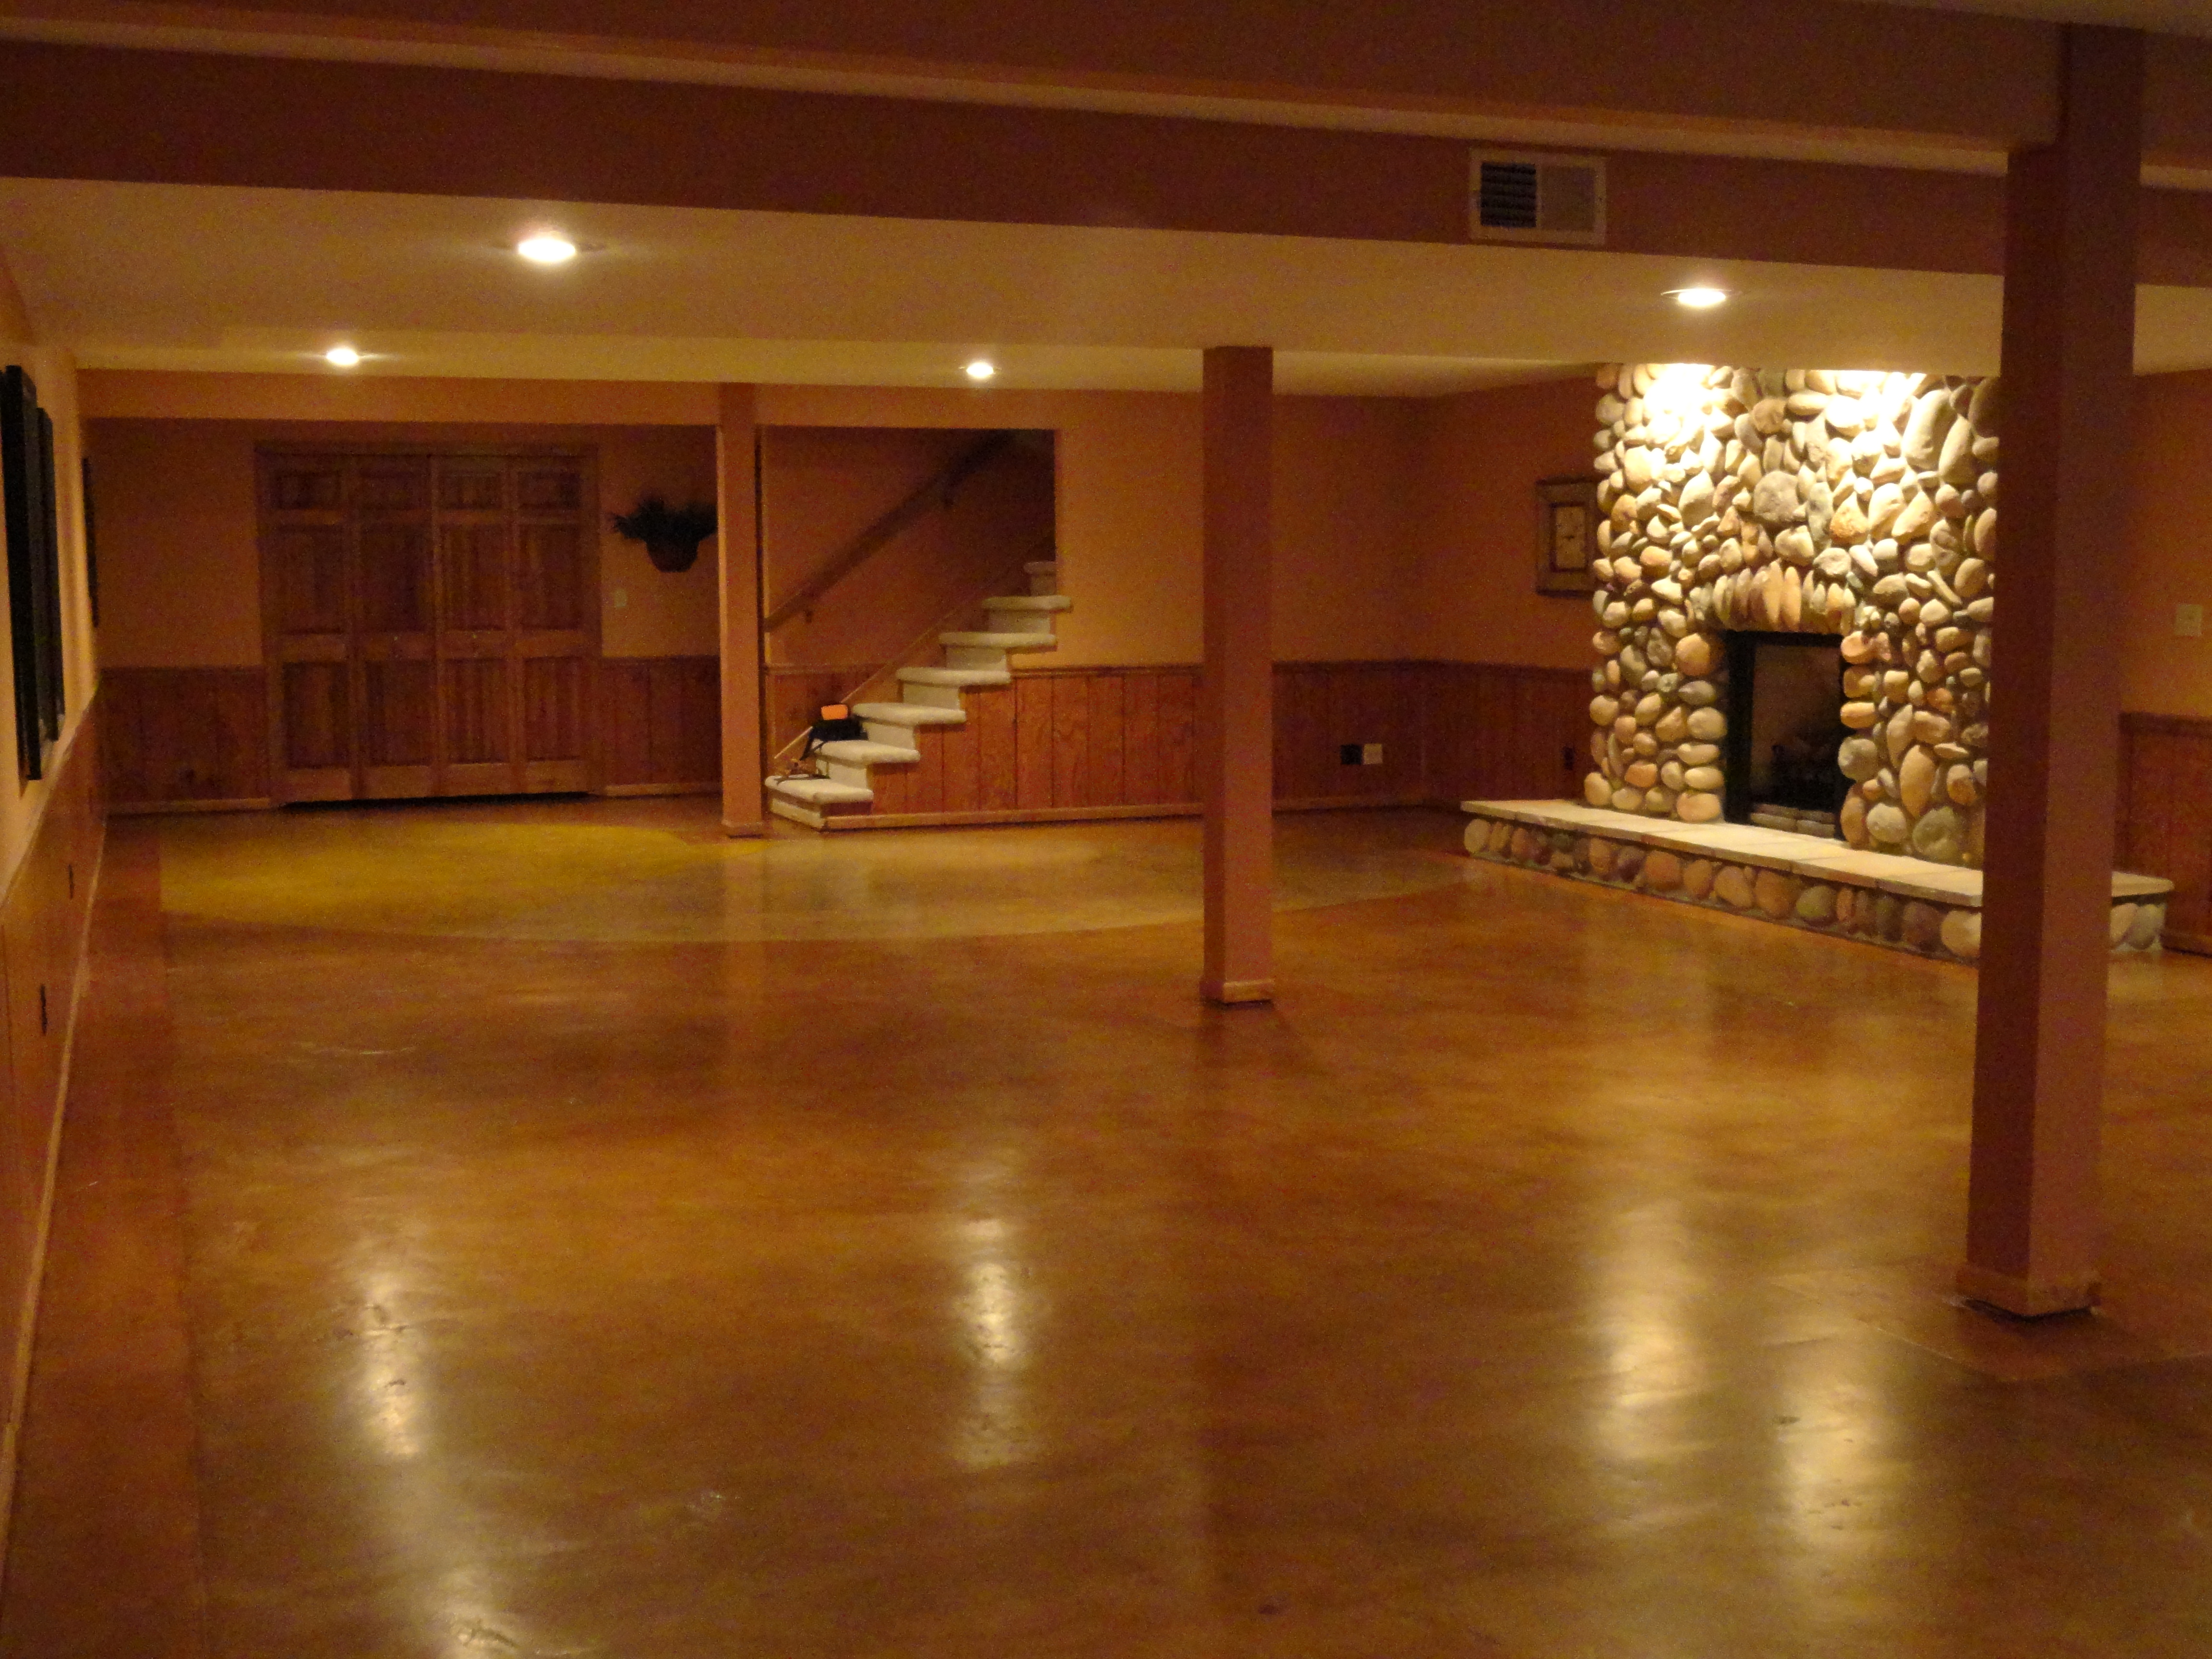 Painting Designs On Concrete Floors With Epoxy In Basement Inside ...